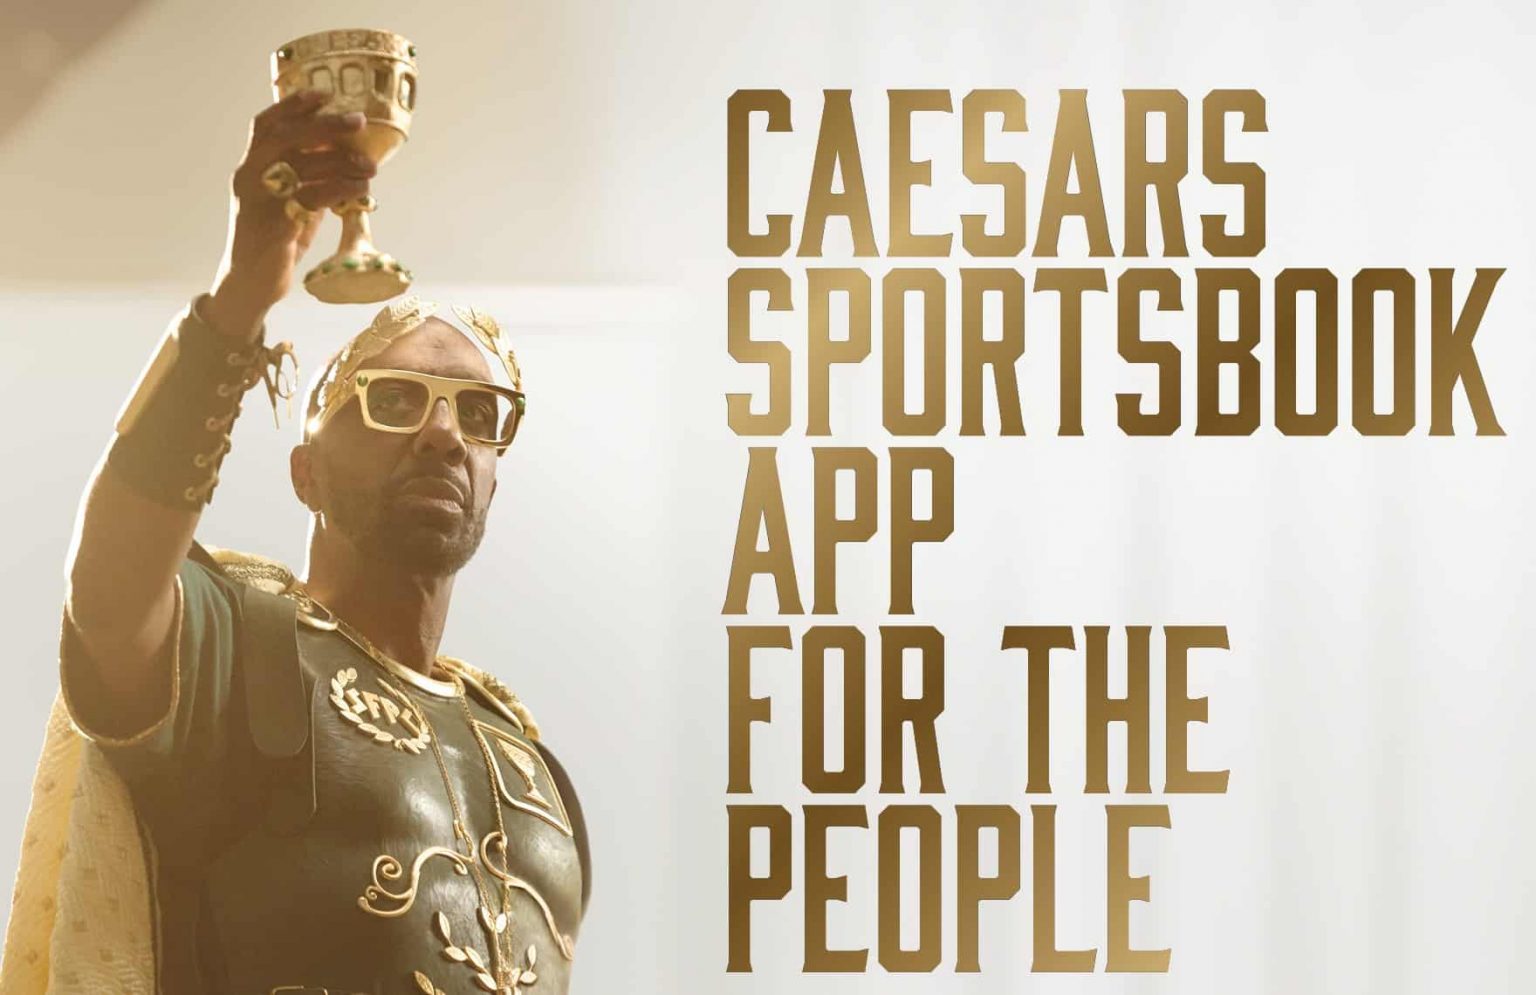 Caesars Casino download the new for apple